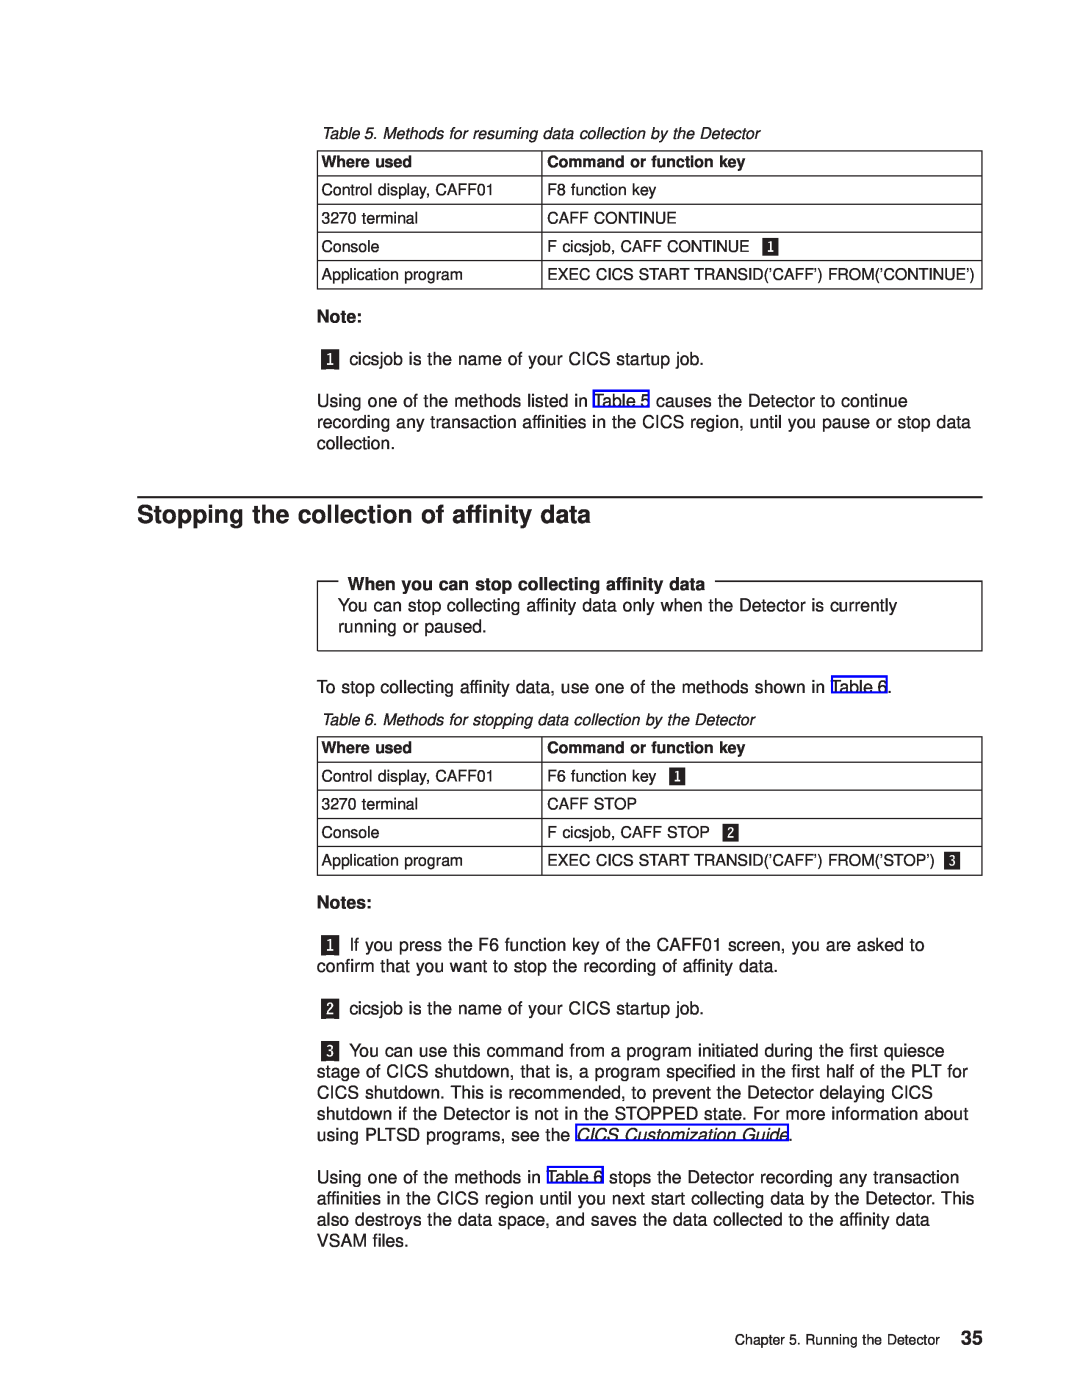 IBM OS manual Stopping the collection of affinity data, When you can stop collecting affinity data 